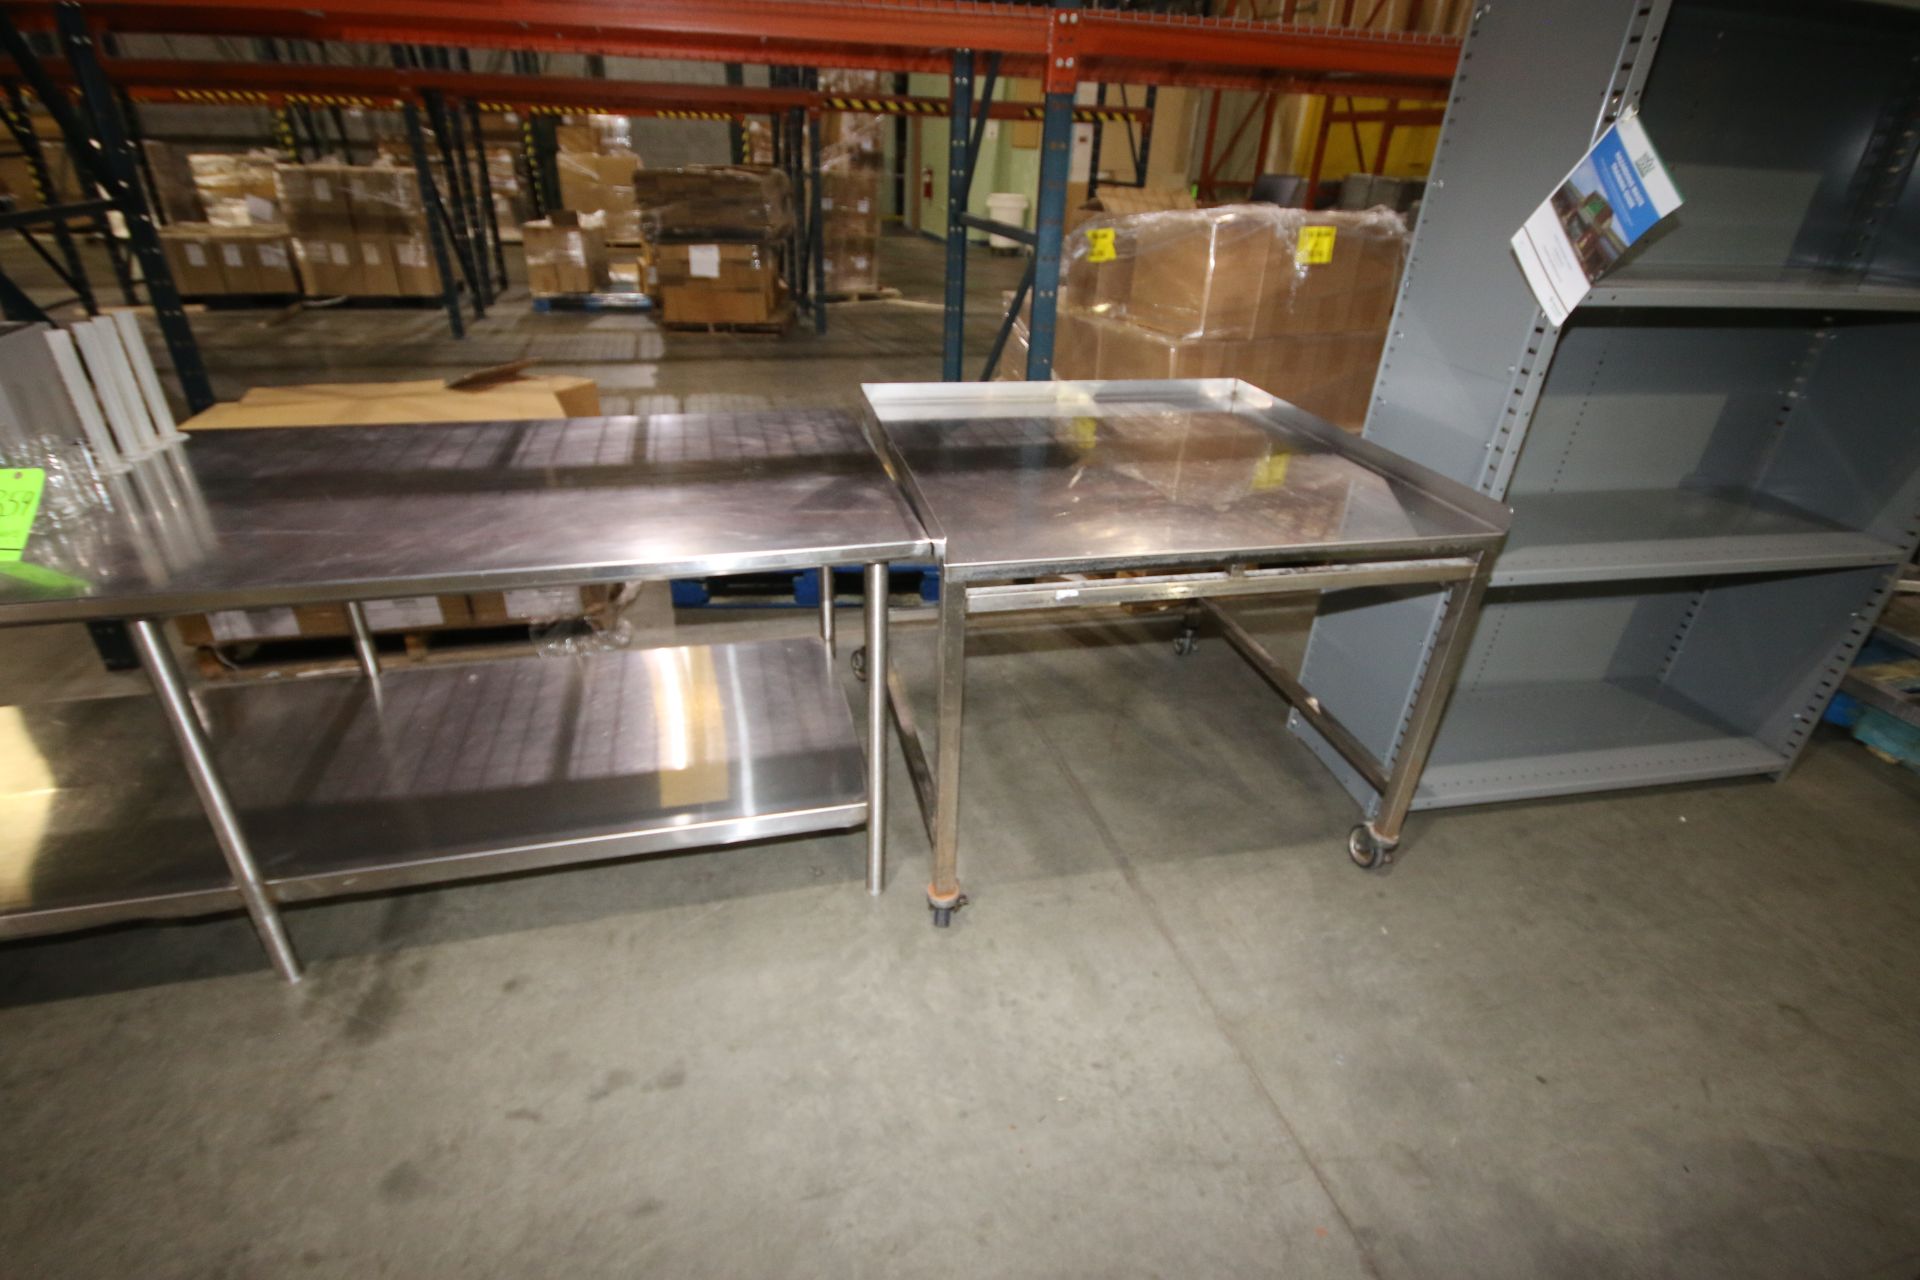 S/S Tables, (2) S/S Tables Mounted on Casters, (2) with S/S Bottom Shelf, Includes Aluminum Book - Image 2 of 4